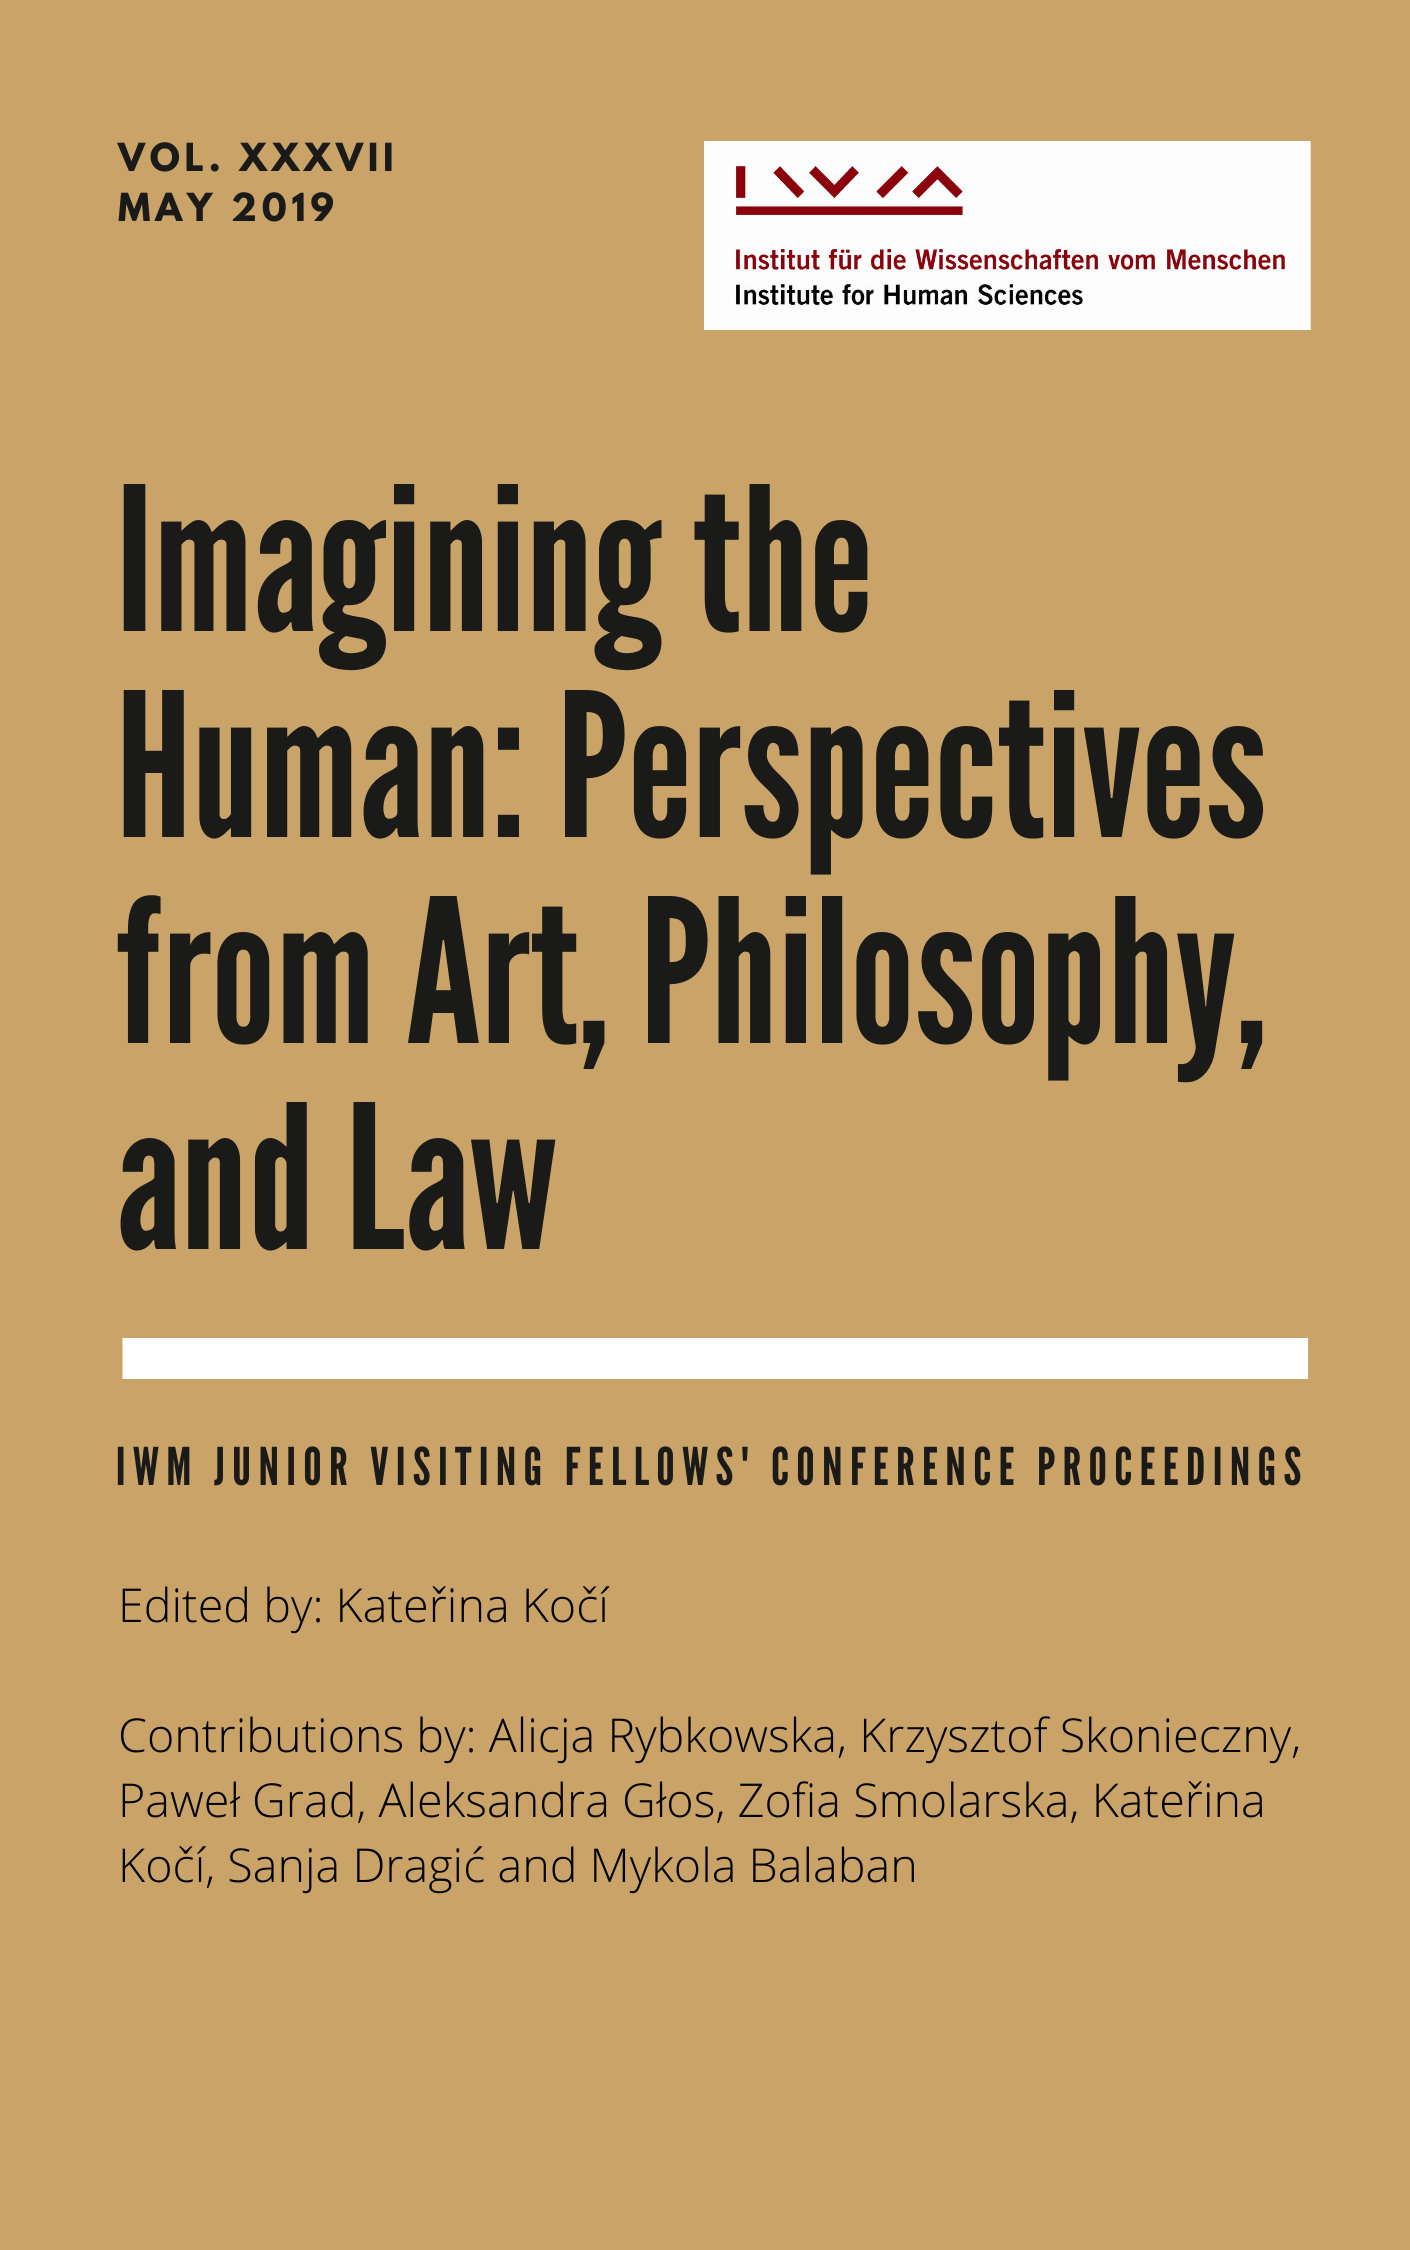 Cover for Vol XXXVII Imagining the Human: Perspectives from Art, Philosophy, and Law